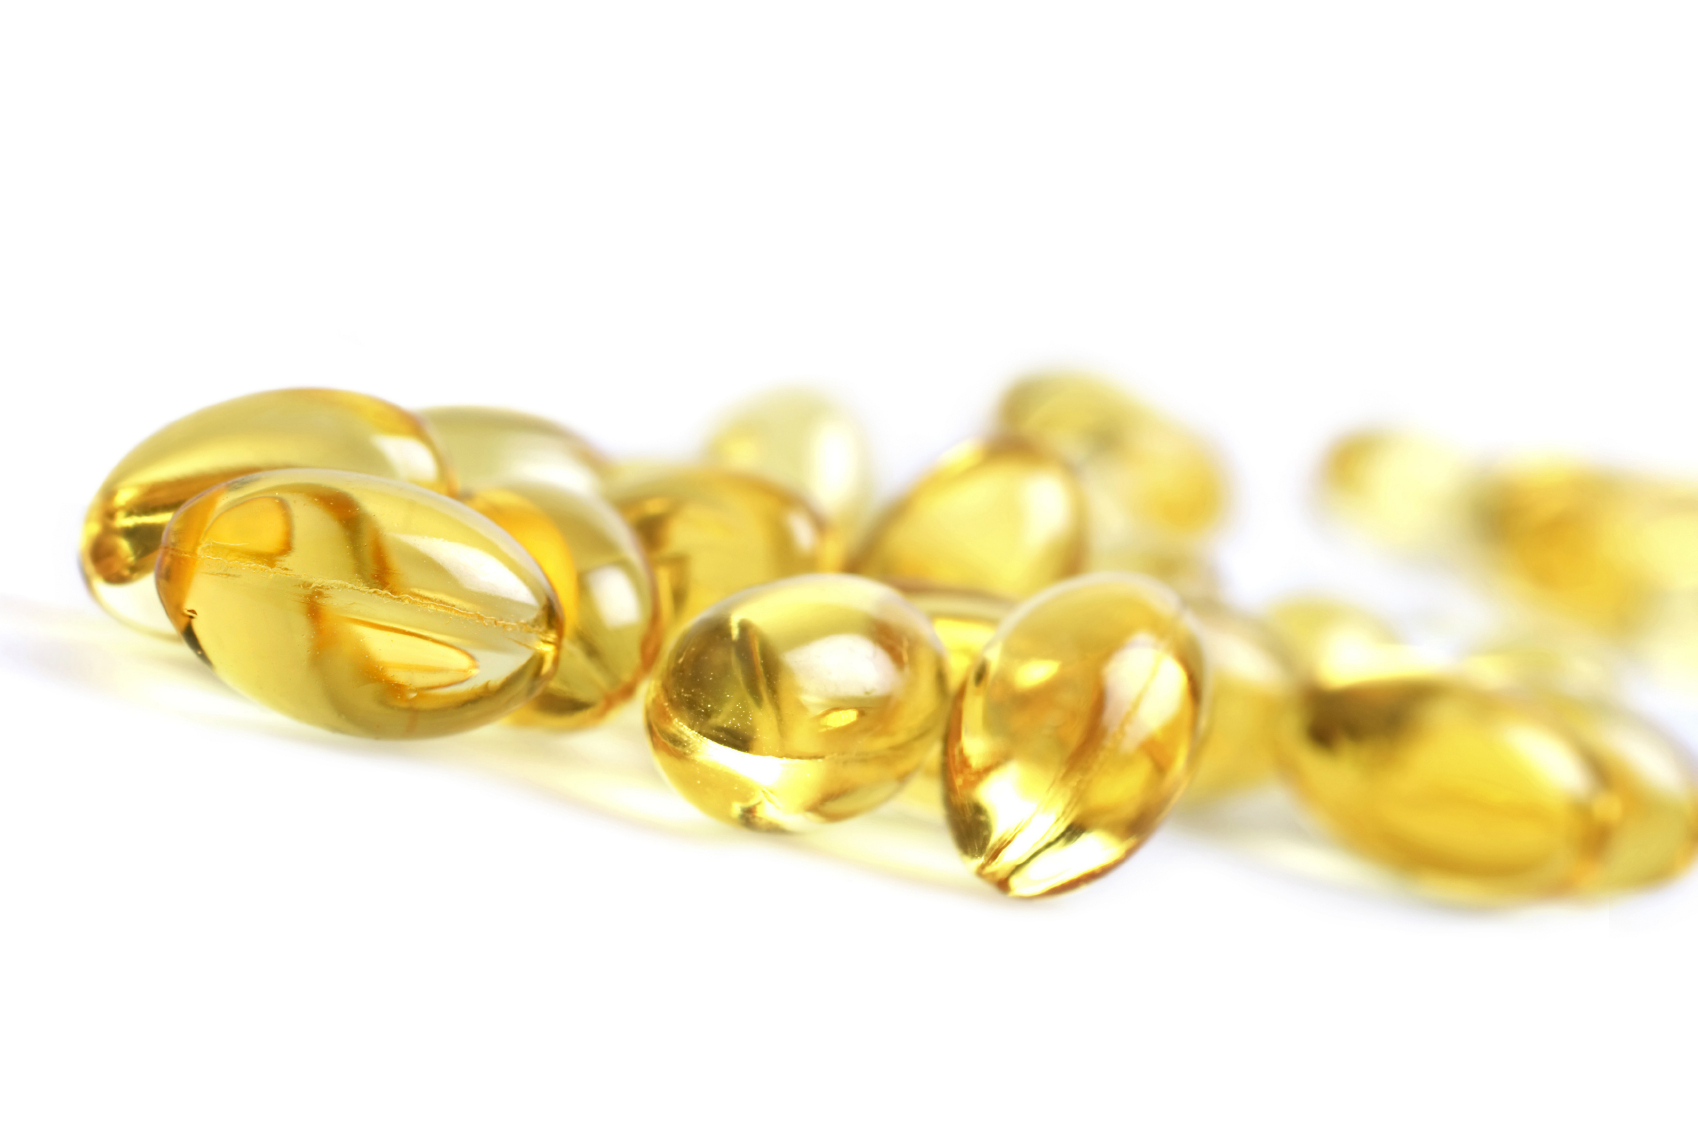 Fish oil fights inflammation, protects your heart, and boosts your brain... Now new research reveals yet another reason you should take it every day.